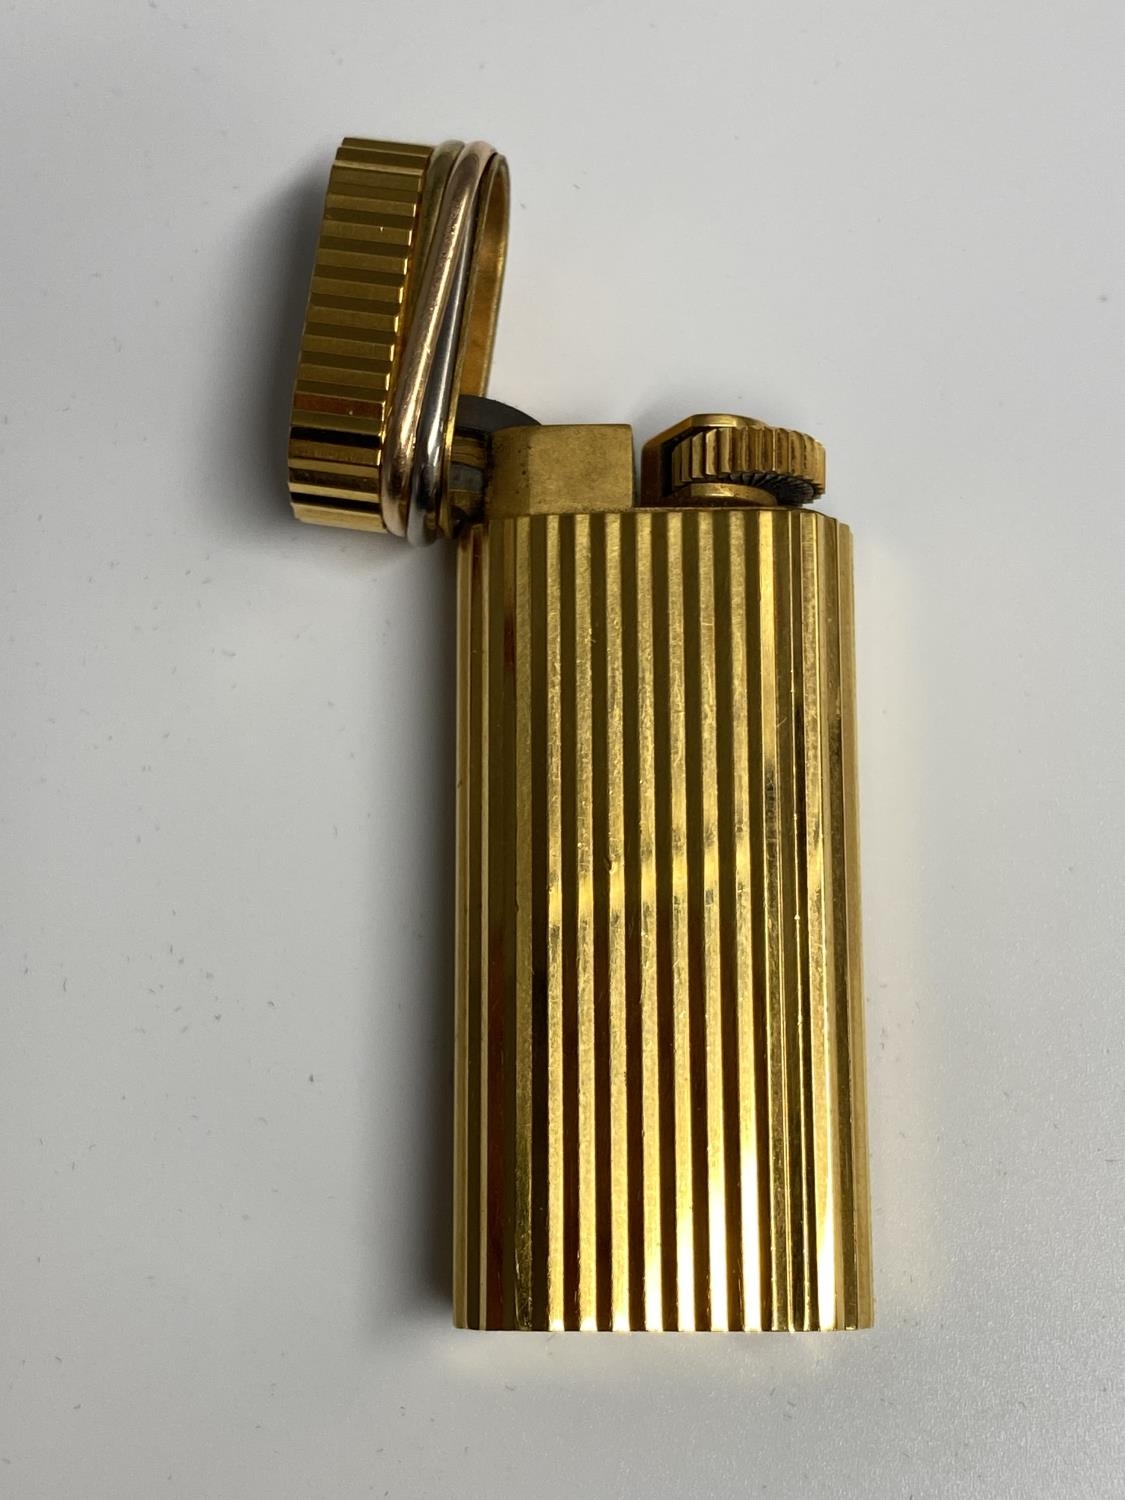 A Cartier Gold plated lighter in red tooled Cartier Box - Image 2 of 8